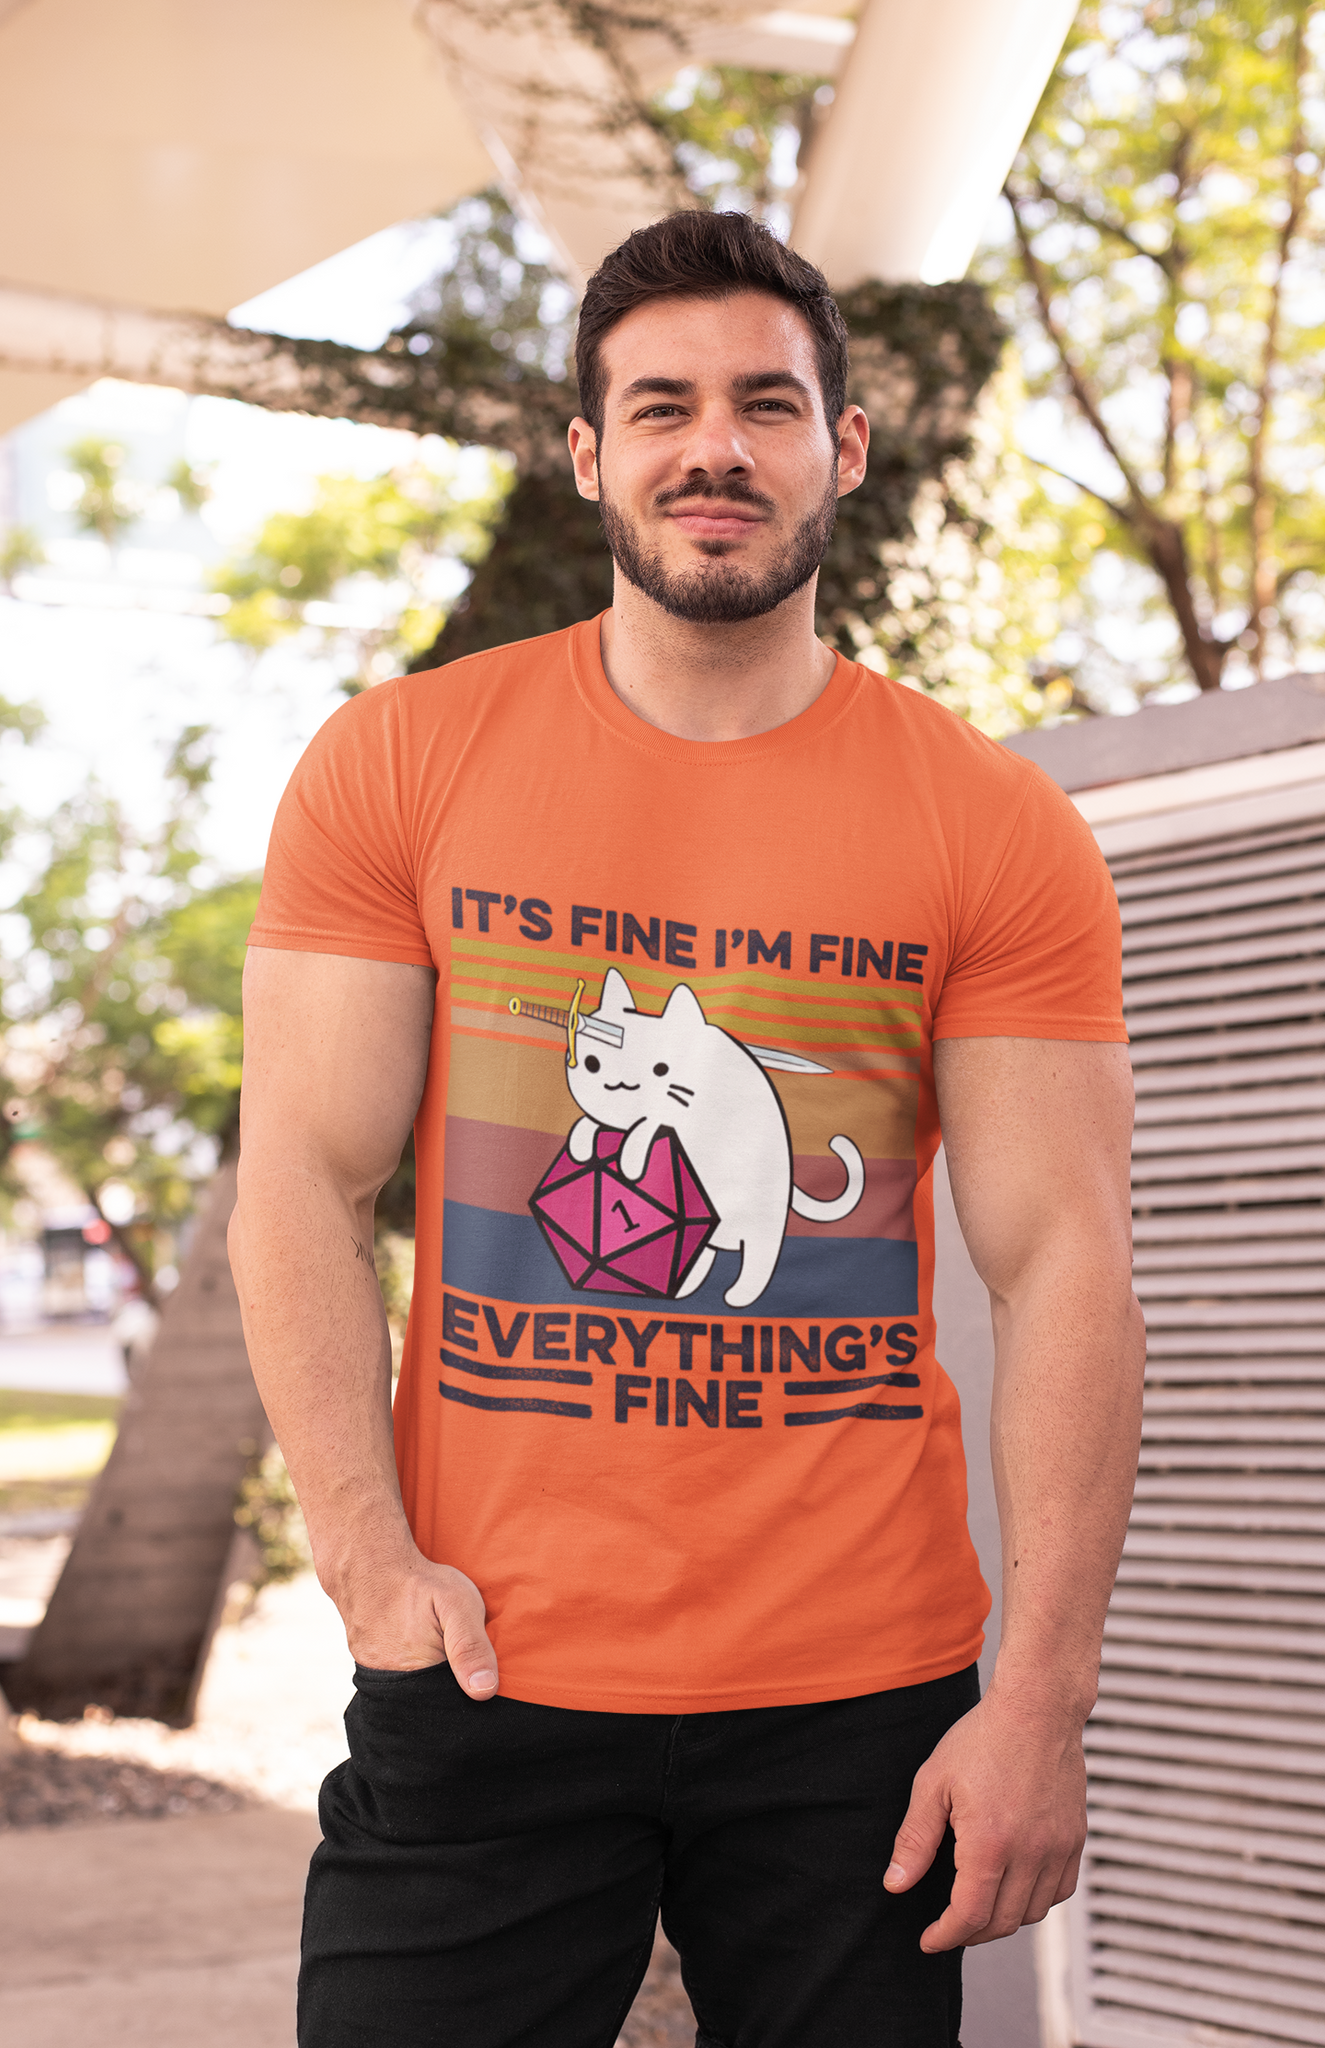 Dungeon And Dragon T Shirt, Cat Its Fine Im Fine Everythings Fine T Shirt, RPG Dice Games Tshirt